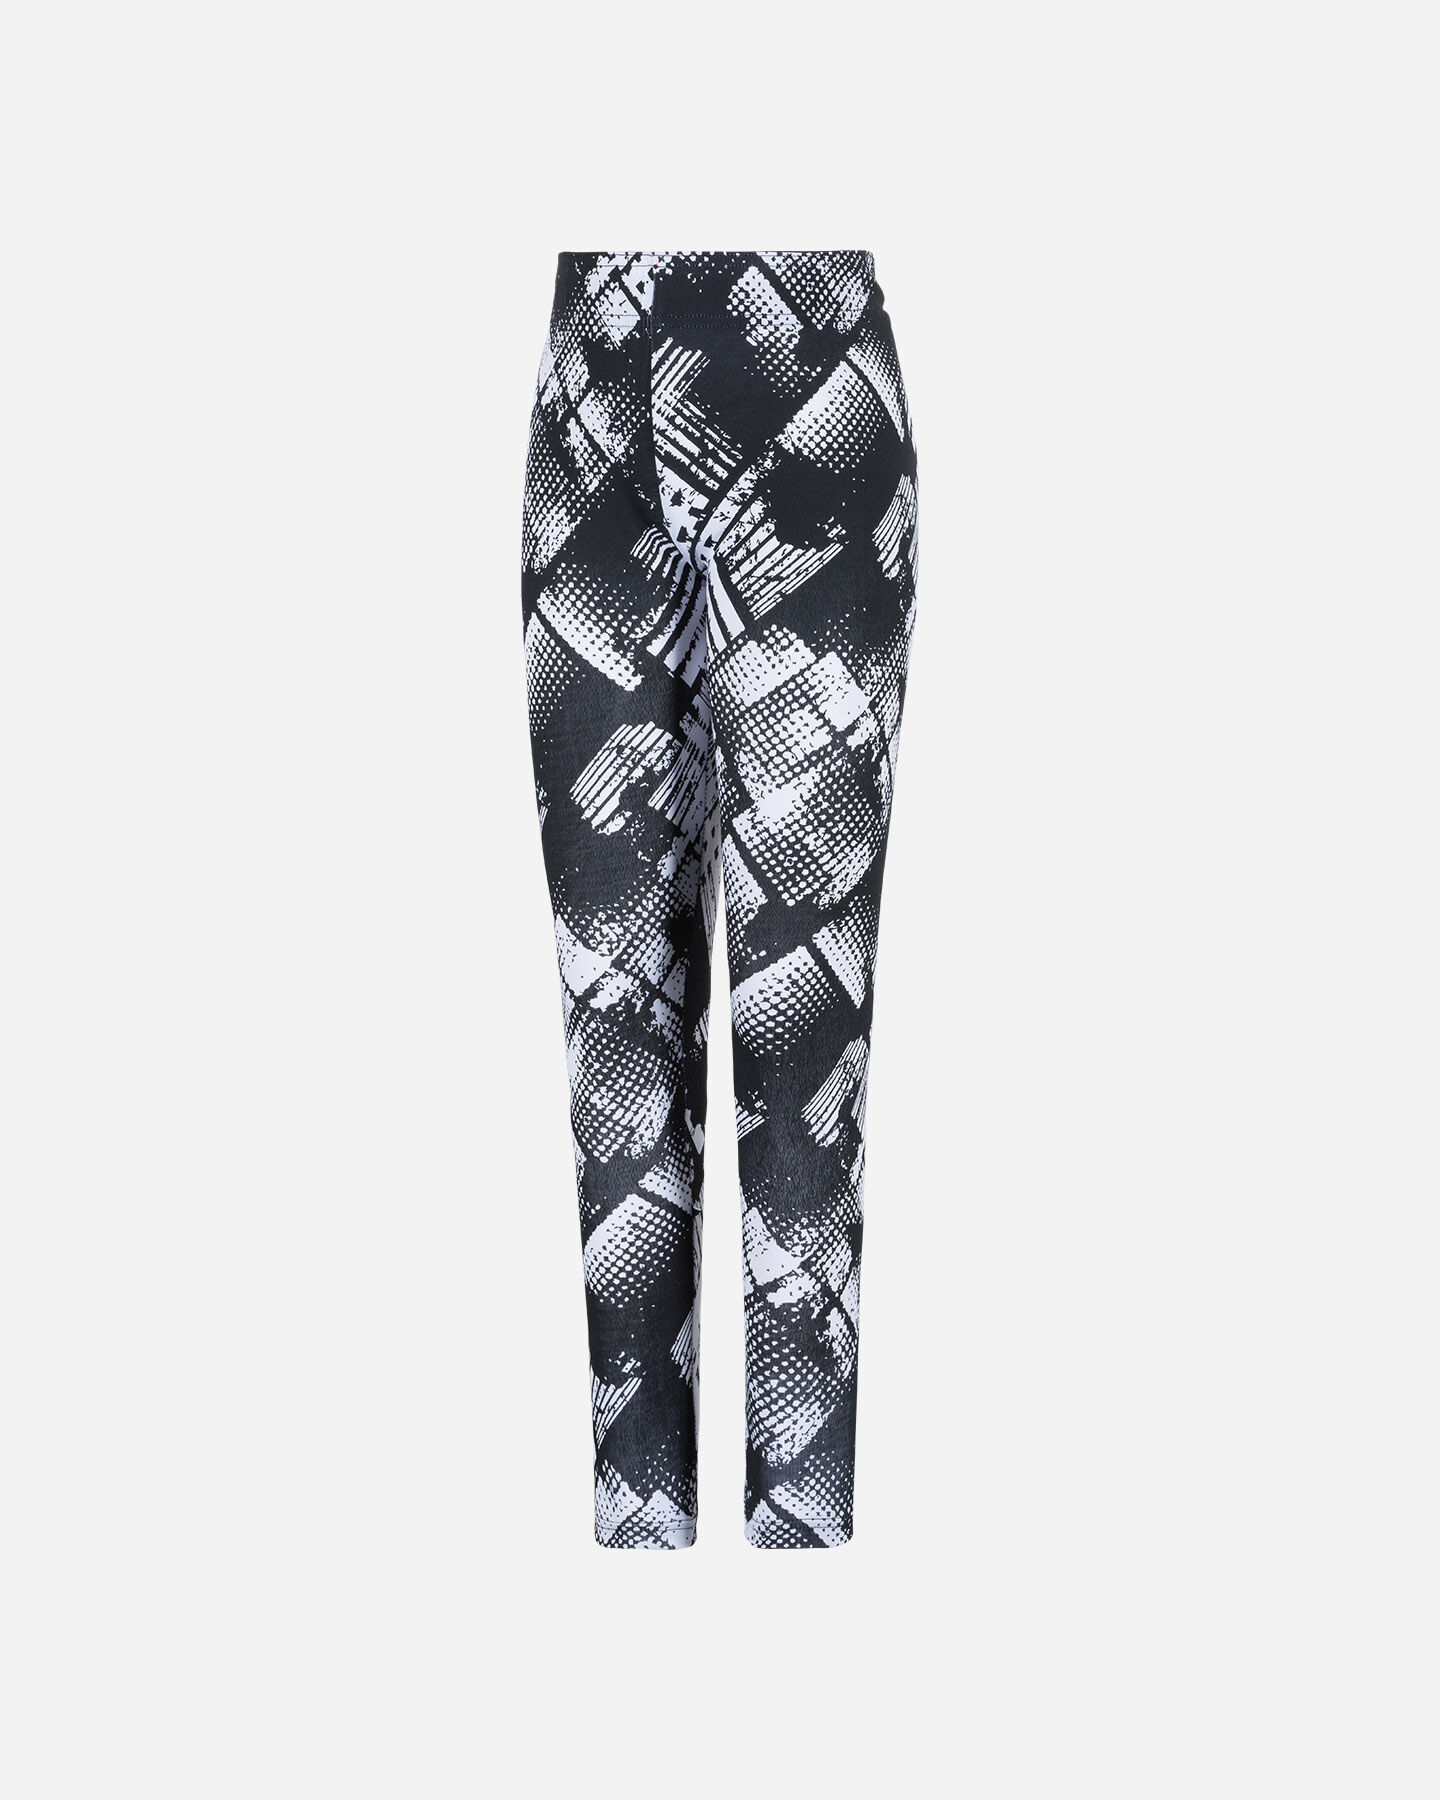  Leggings ARENA ALL OVER JR S4075125|AOP/050|4A scatto 0